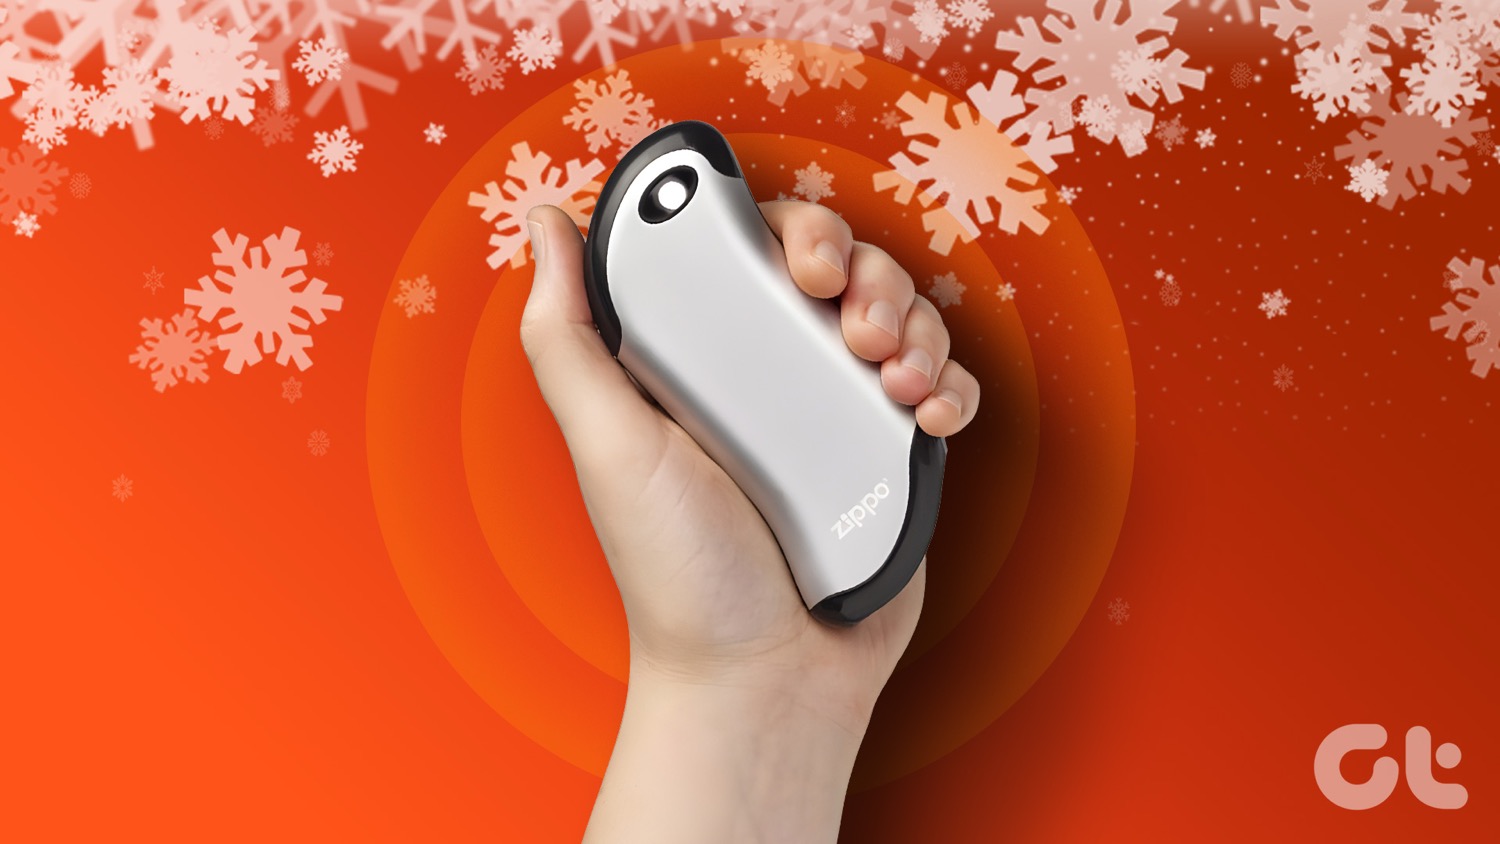 Best Rechargeable Hand Warmers